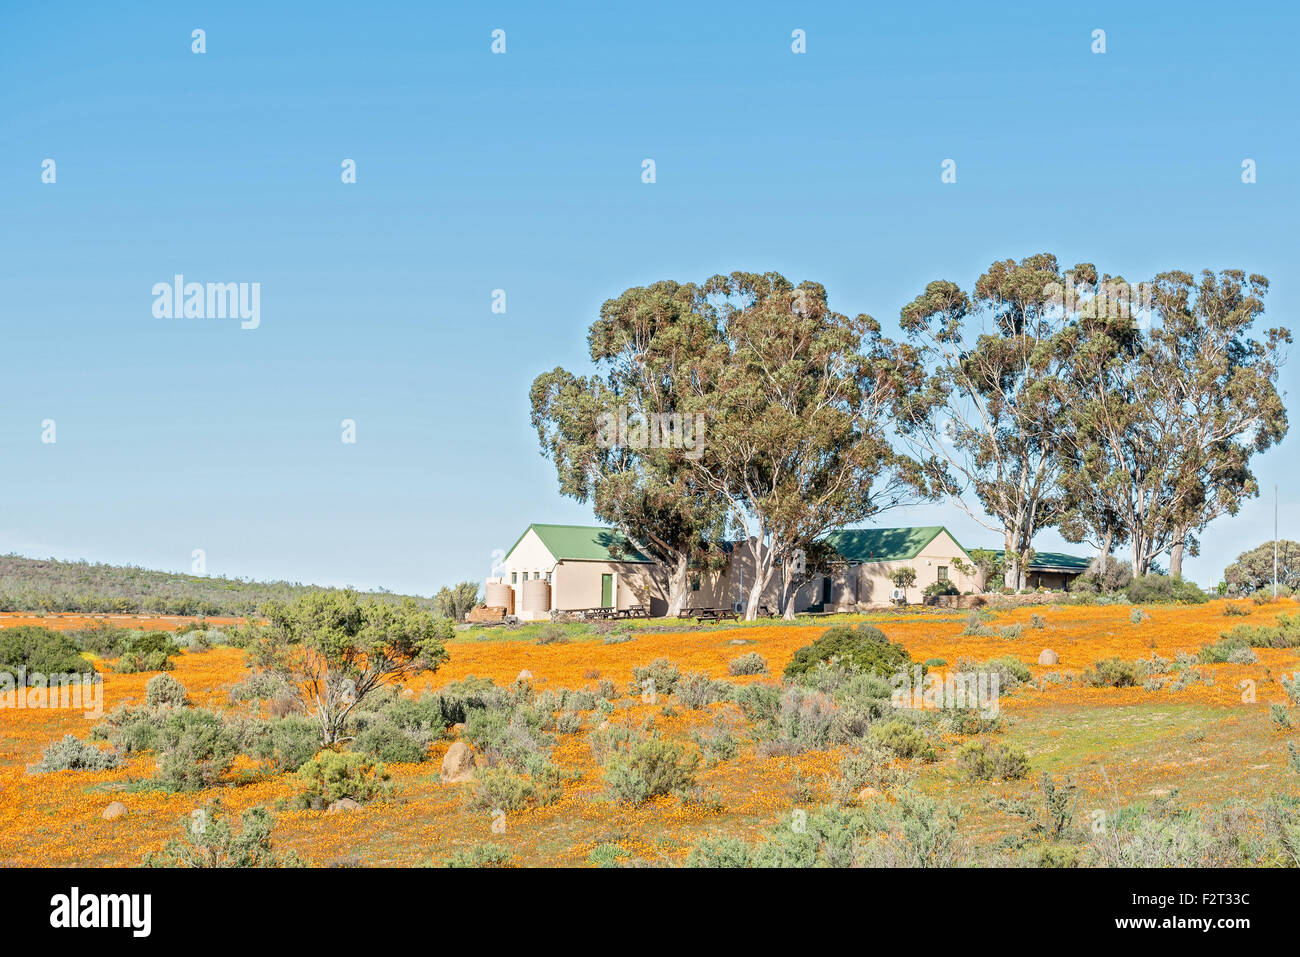 SKILPAD, SOUTH AFRICA - AUGUST 14, 2015: The office buildings of the Namaqua National Park at Skilpad (tortoise) with orange dai Stock Photo